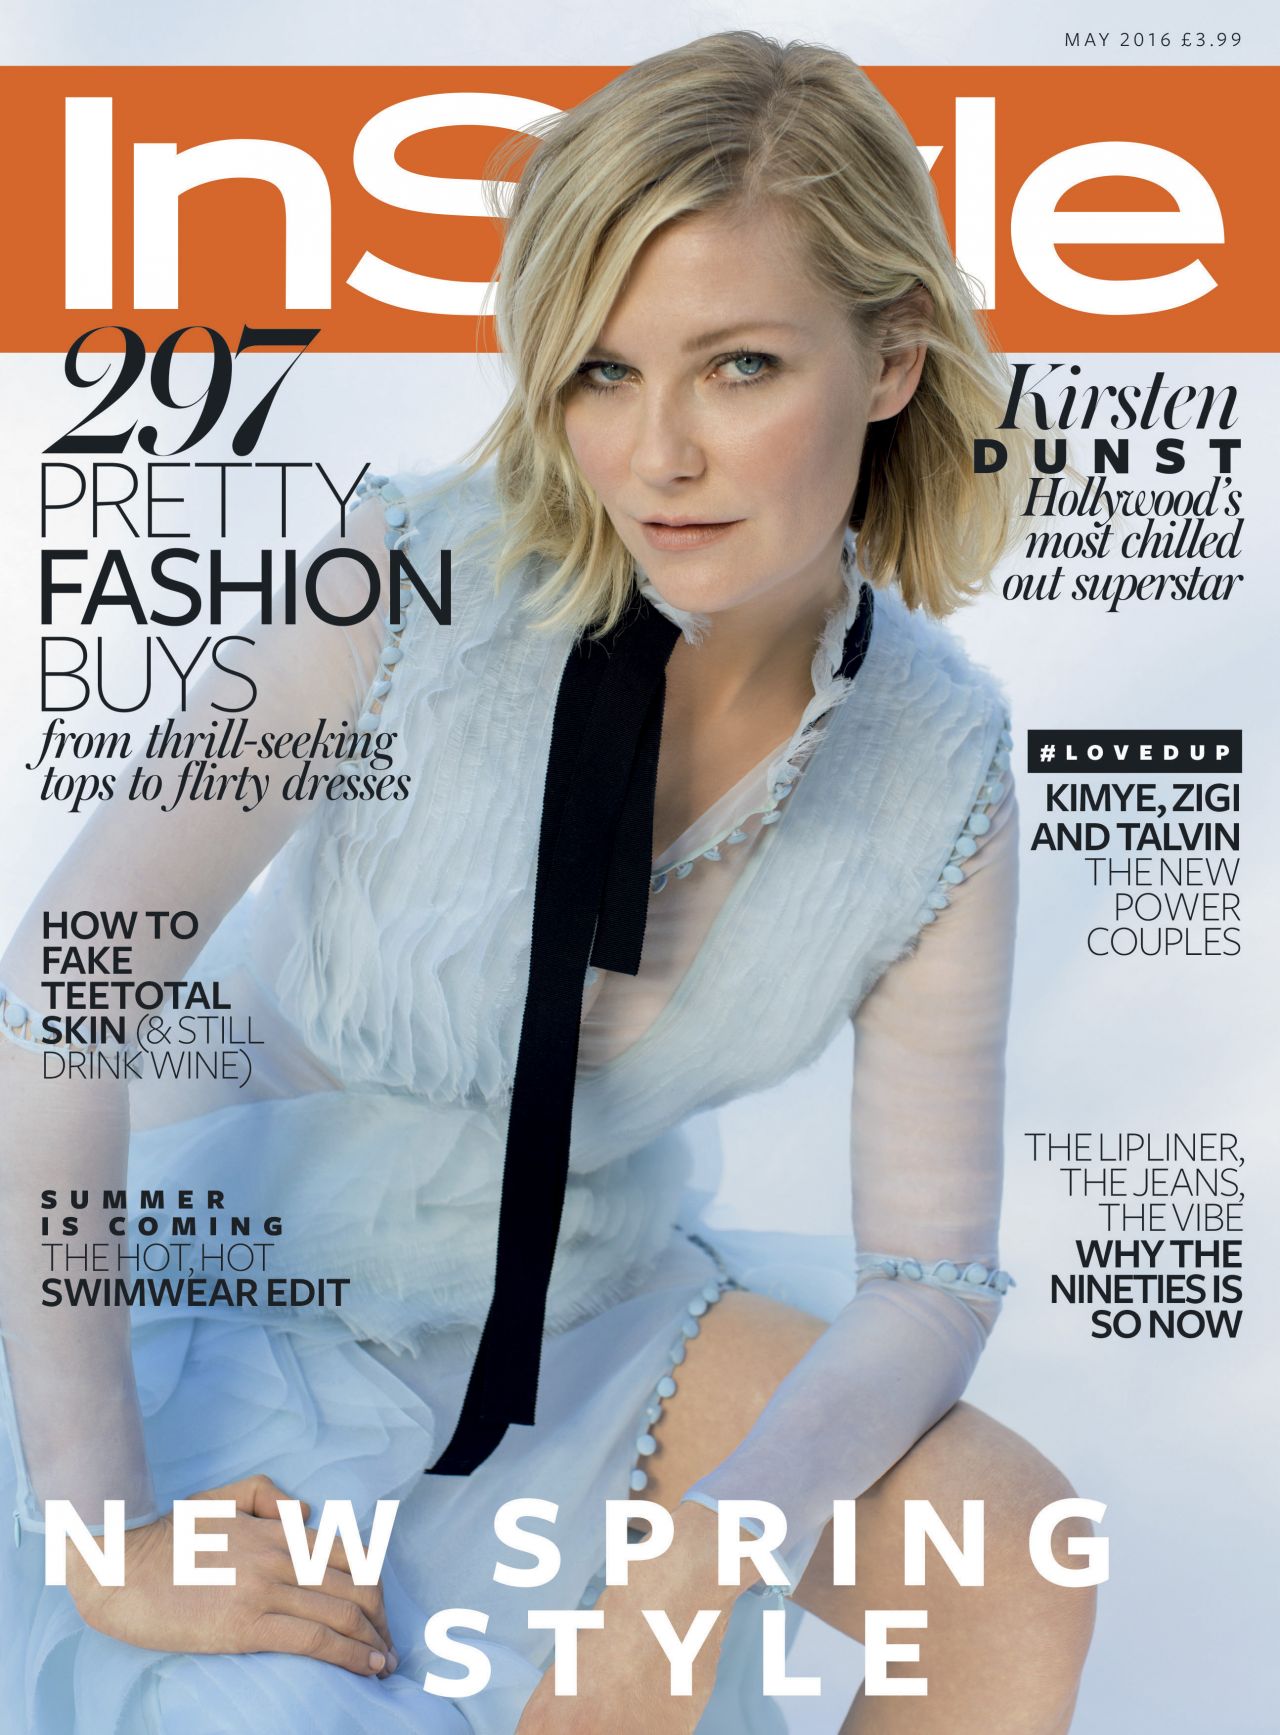 CAMERON DIAZ in InStyle Magazine, May 2012 Issue - HawtCelebs